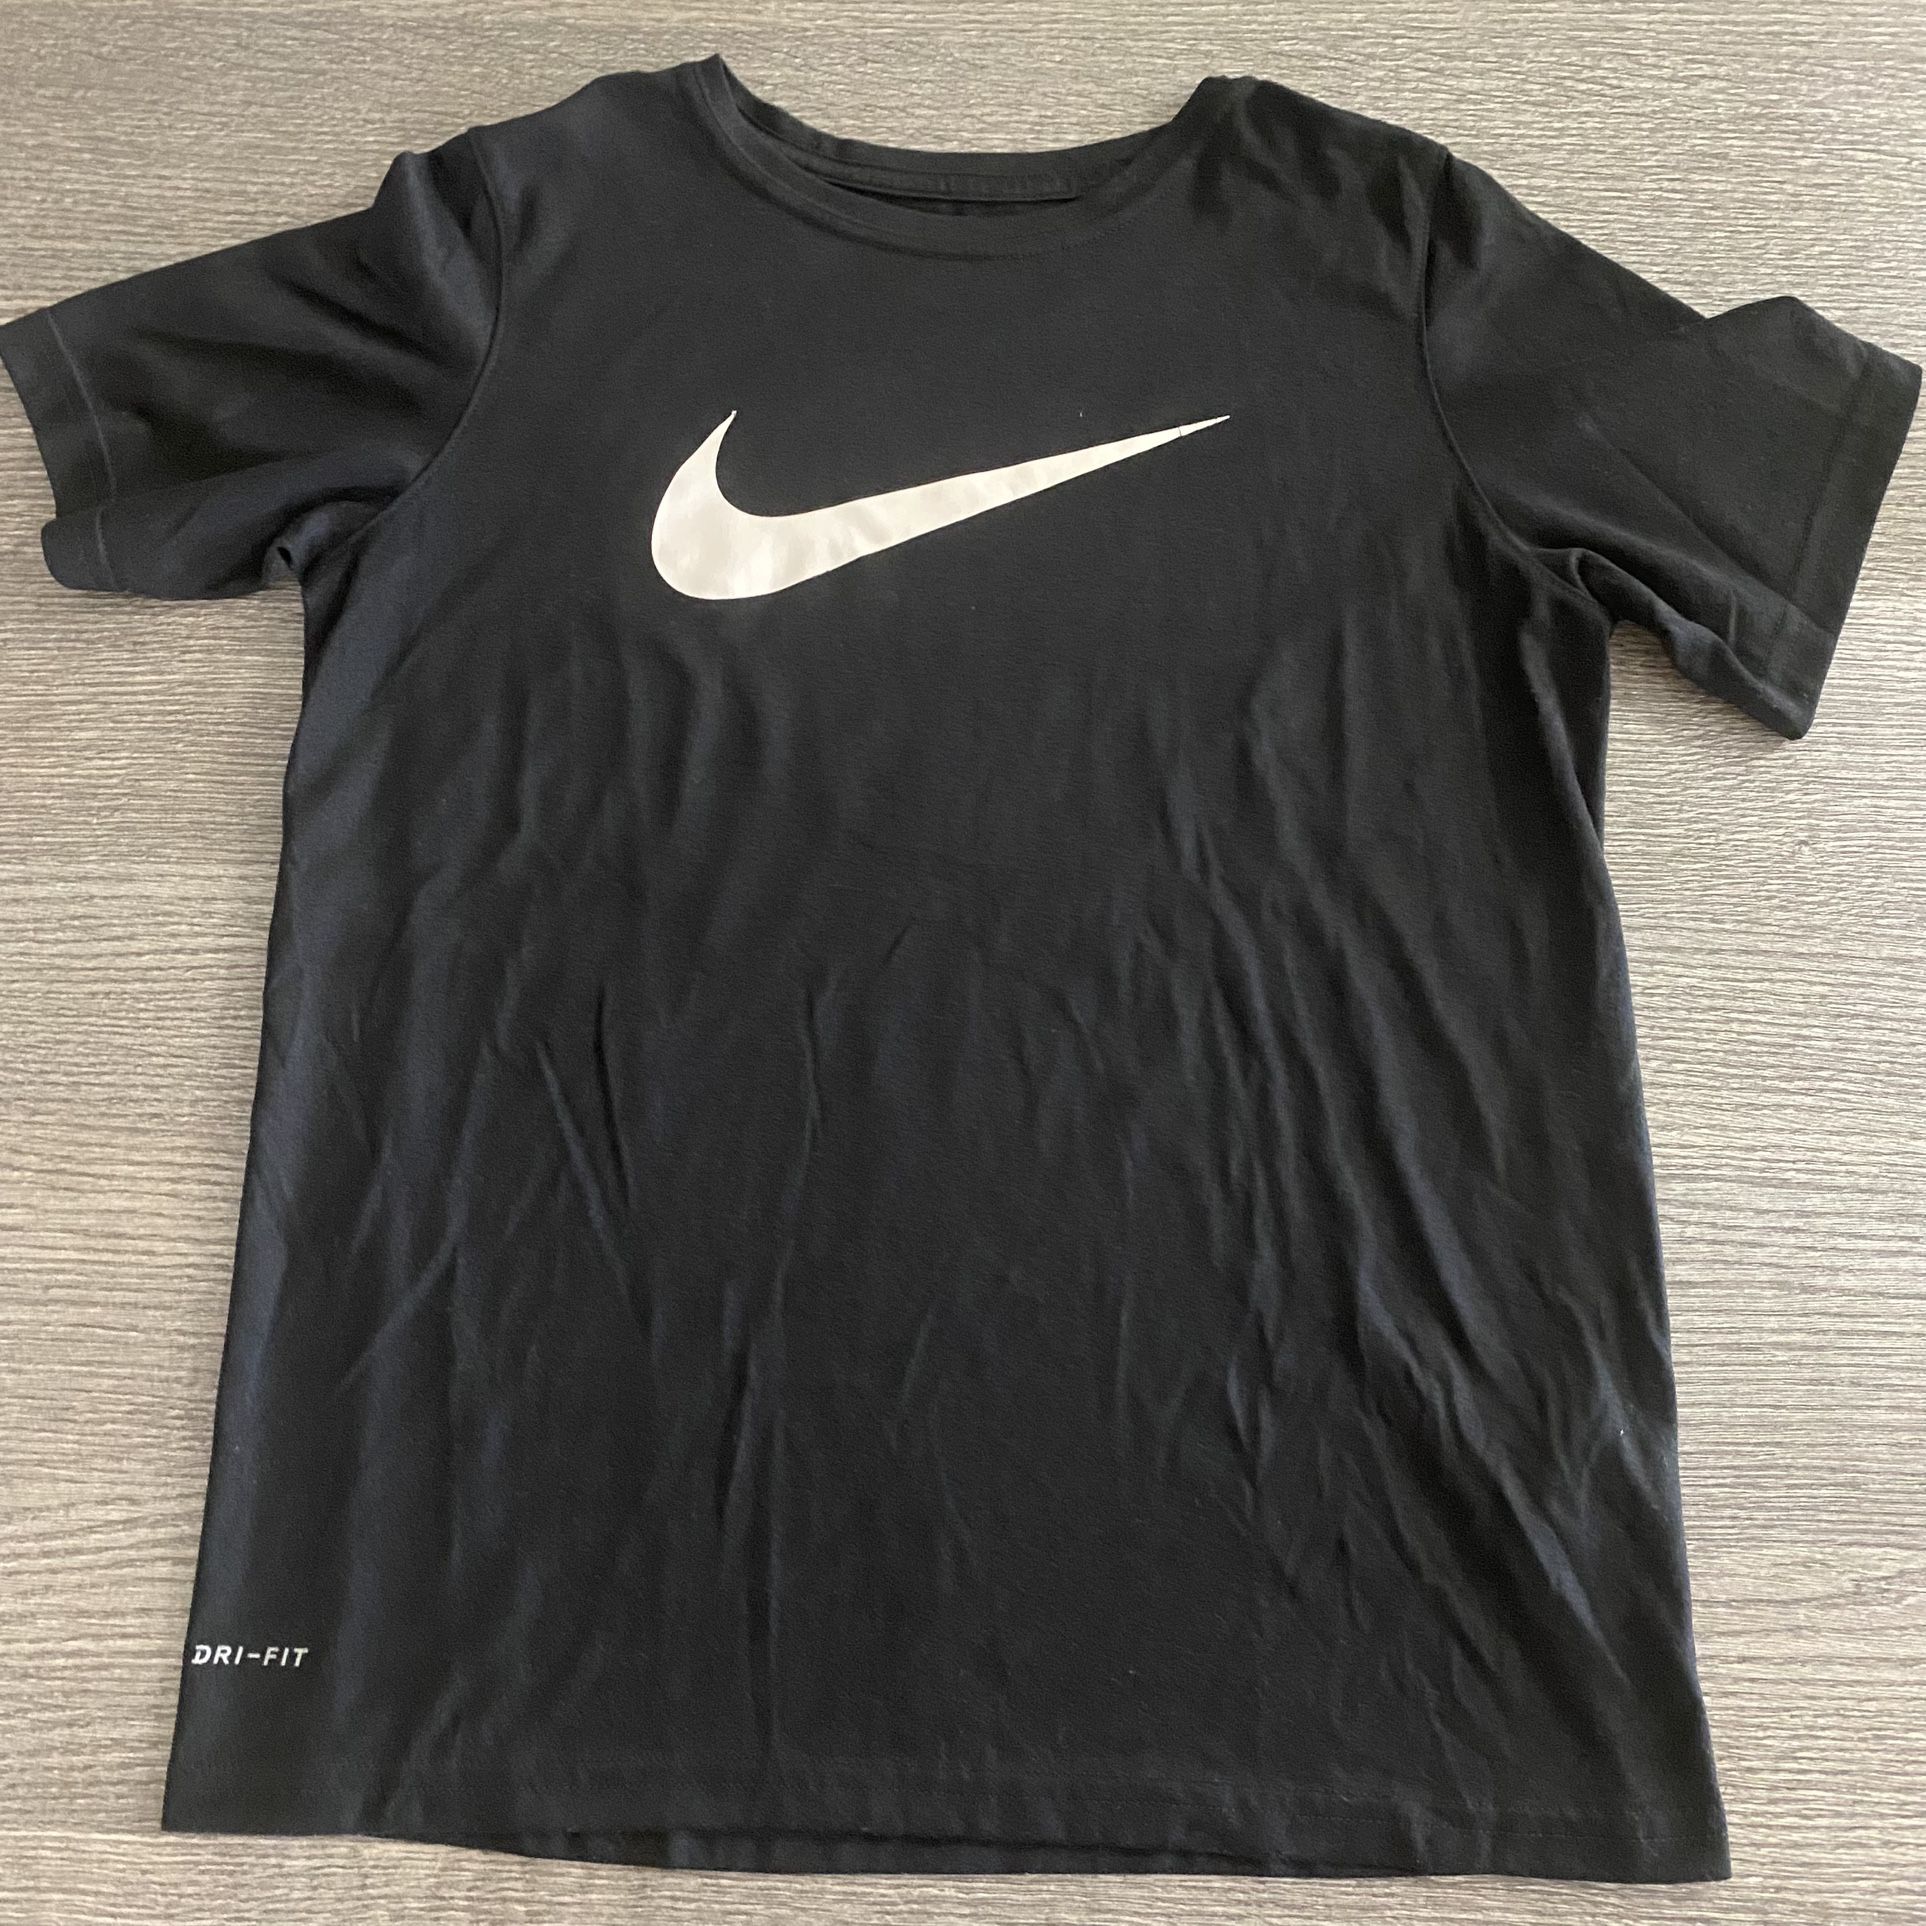 Nike dri fit Tee Girls Or Unisex Size L Short sleeve T-shirt Athletic Tee